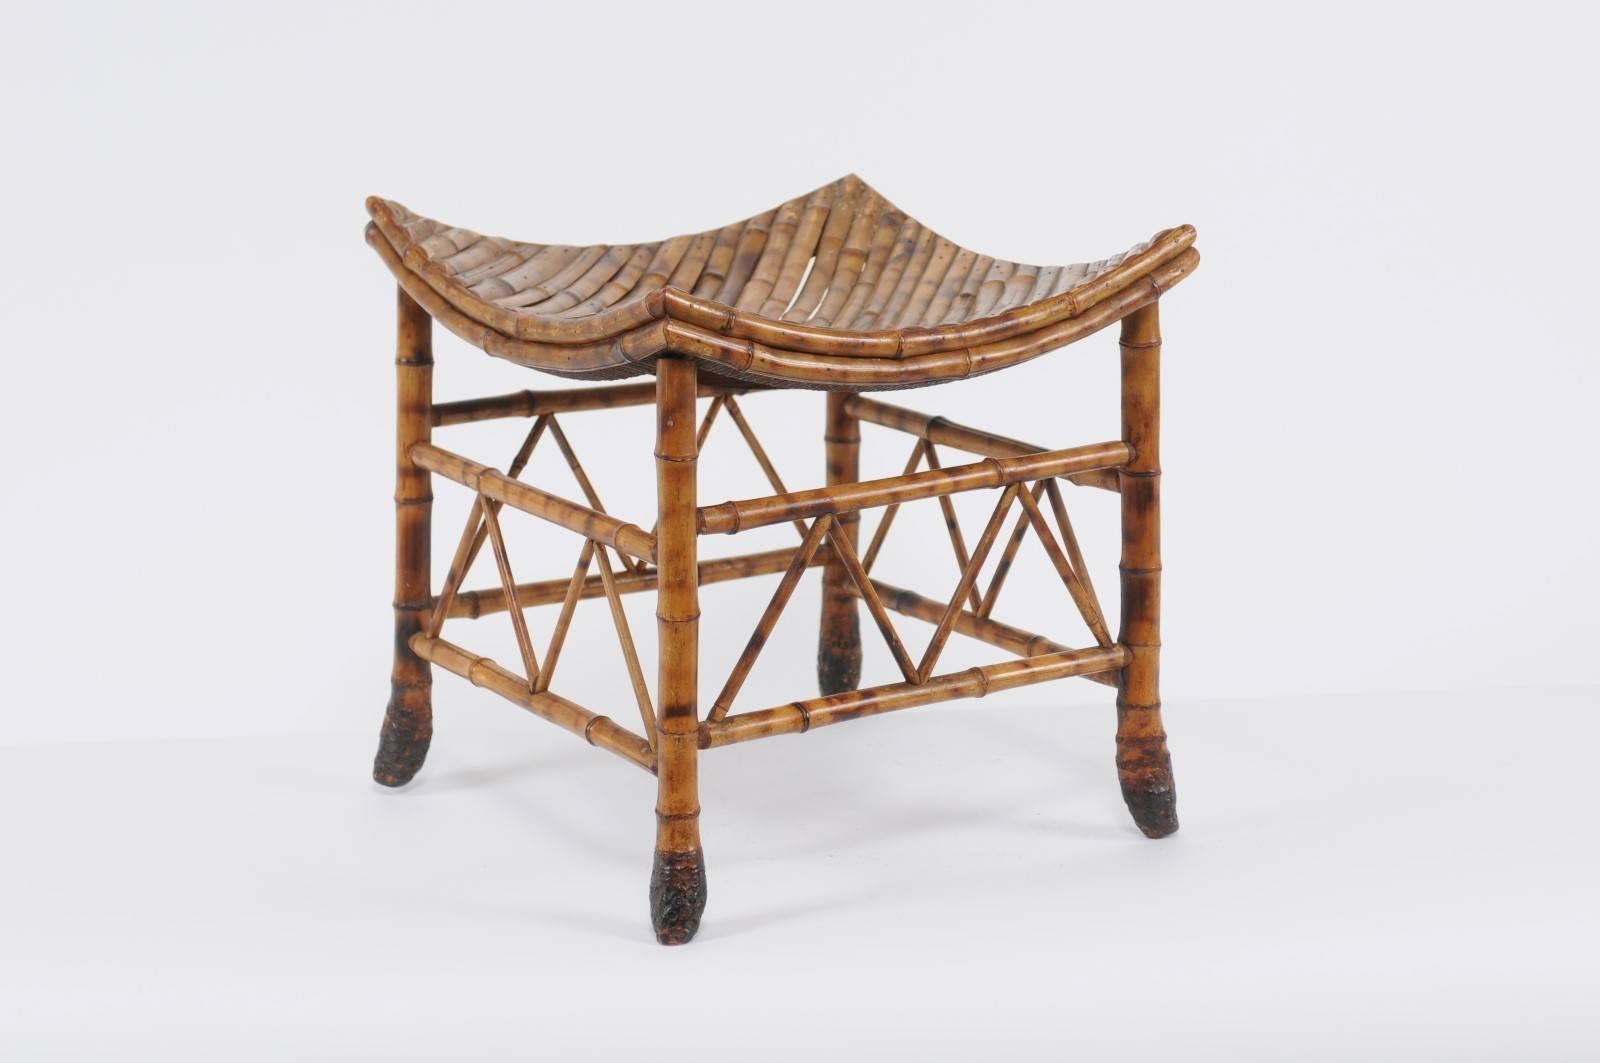 An English Egyptian Revival bamboo Thebes stool from the early 20th century. This English Thebes stool is a perfect example of the enthusiasm for everything Egyptian that started in the early 19th century with Napoléon I's conquest of Egypt and that